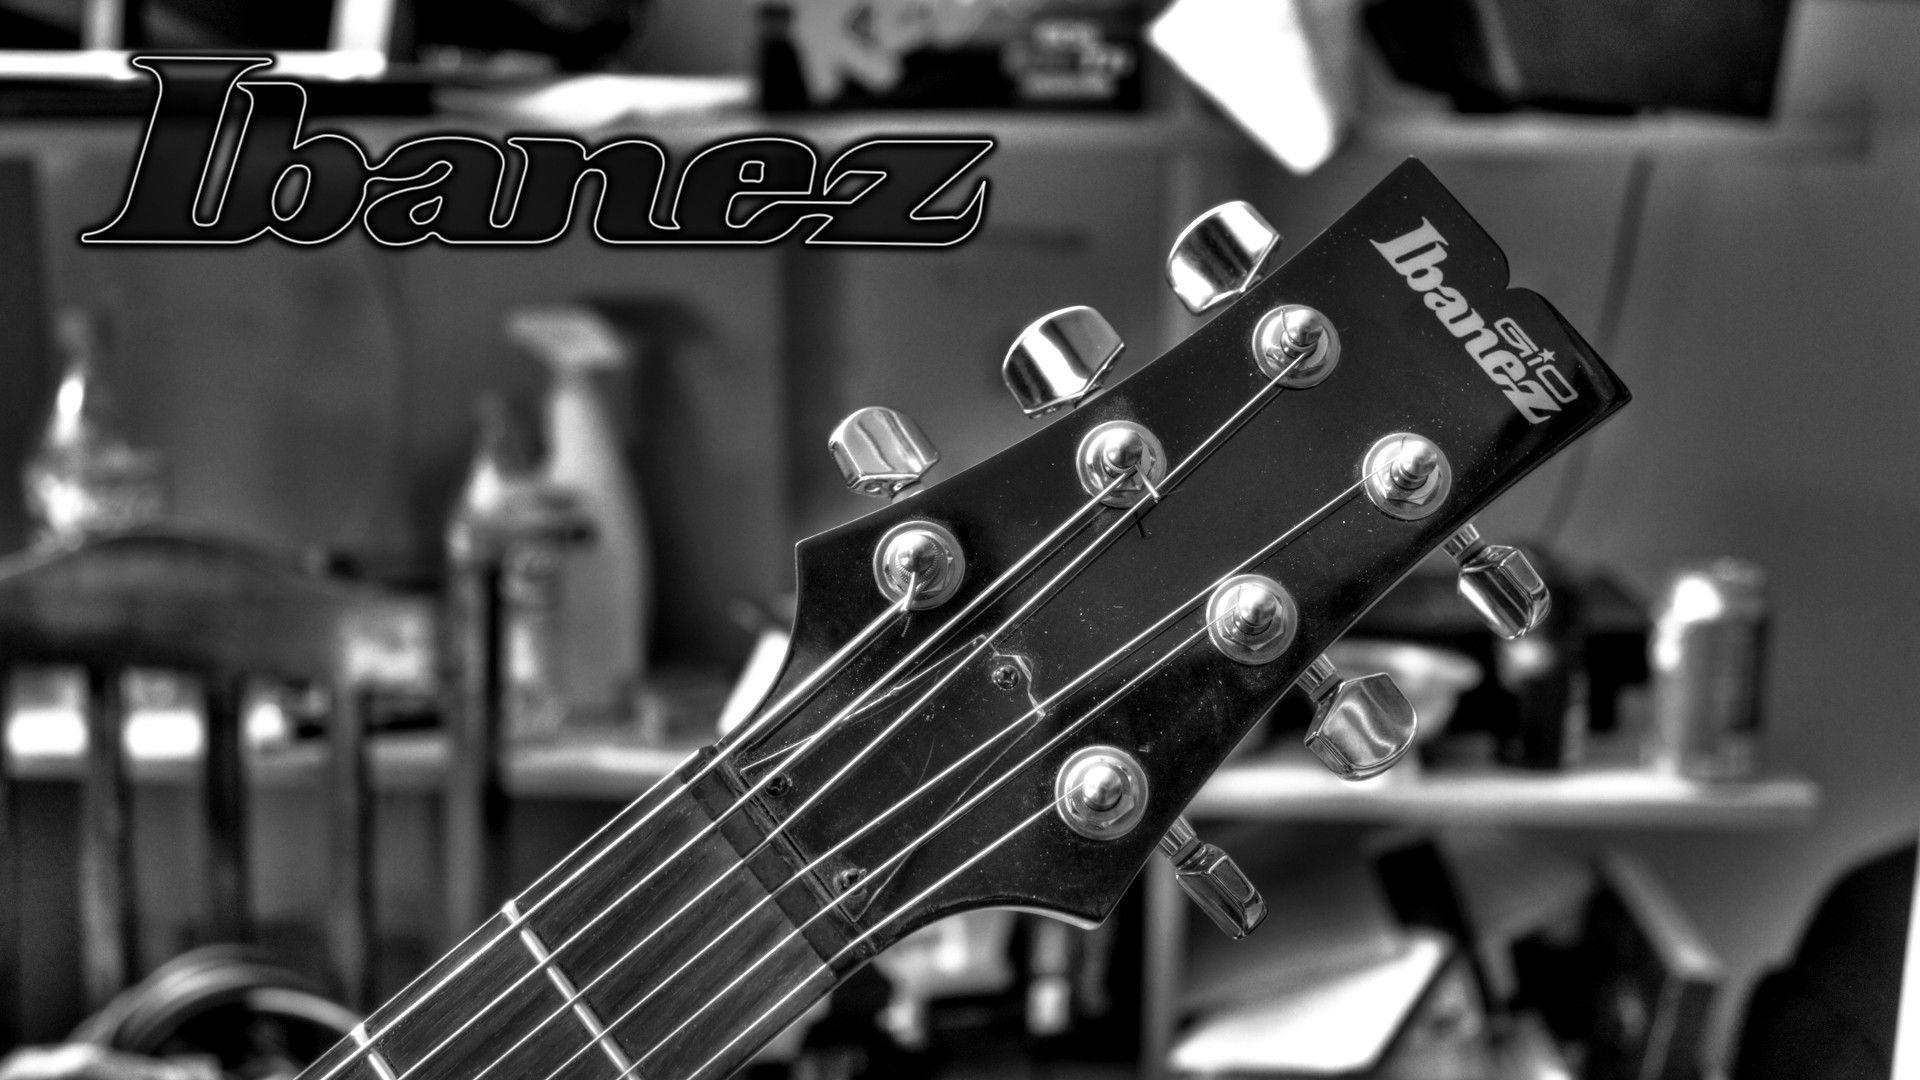 Ibanez Electric Guitar Picture Wallpaper